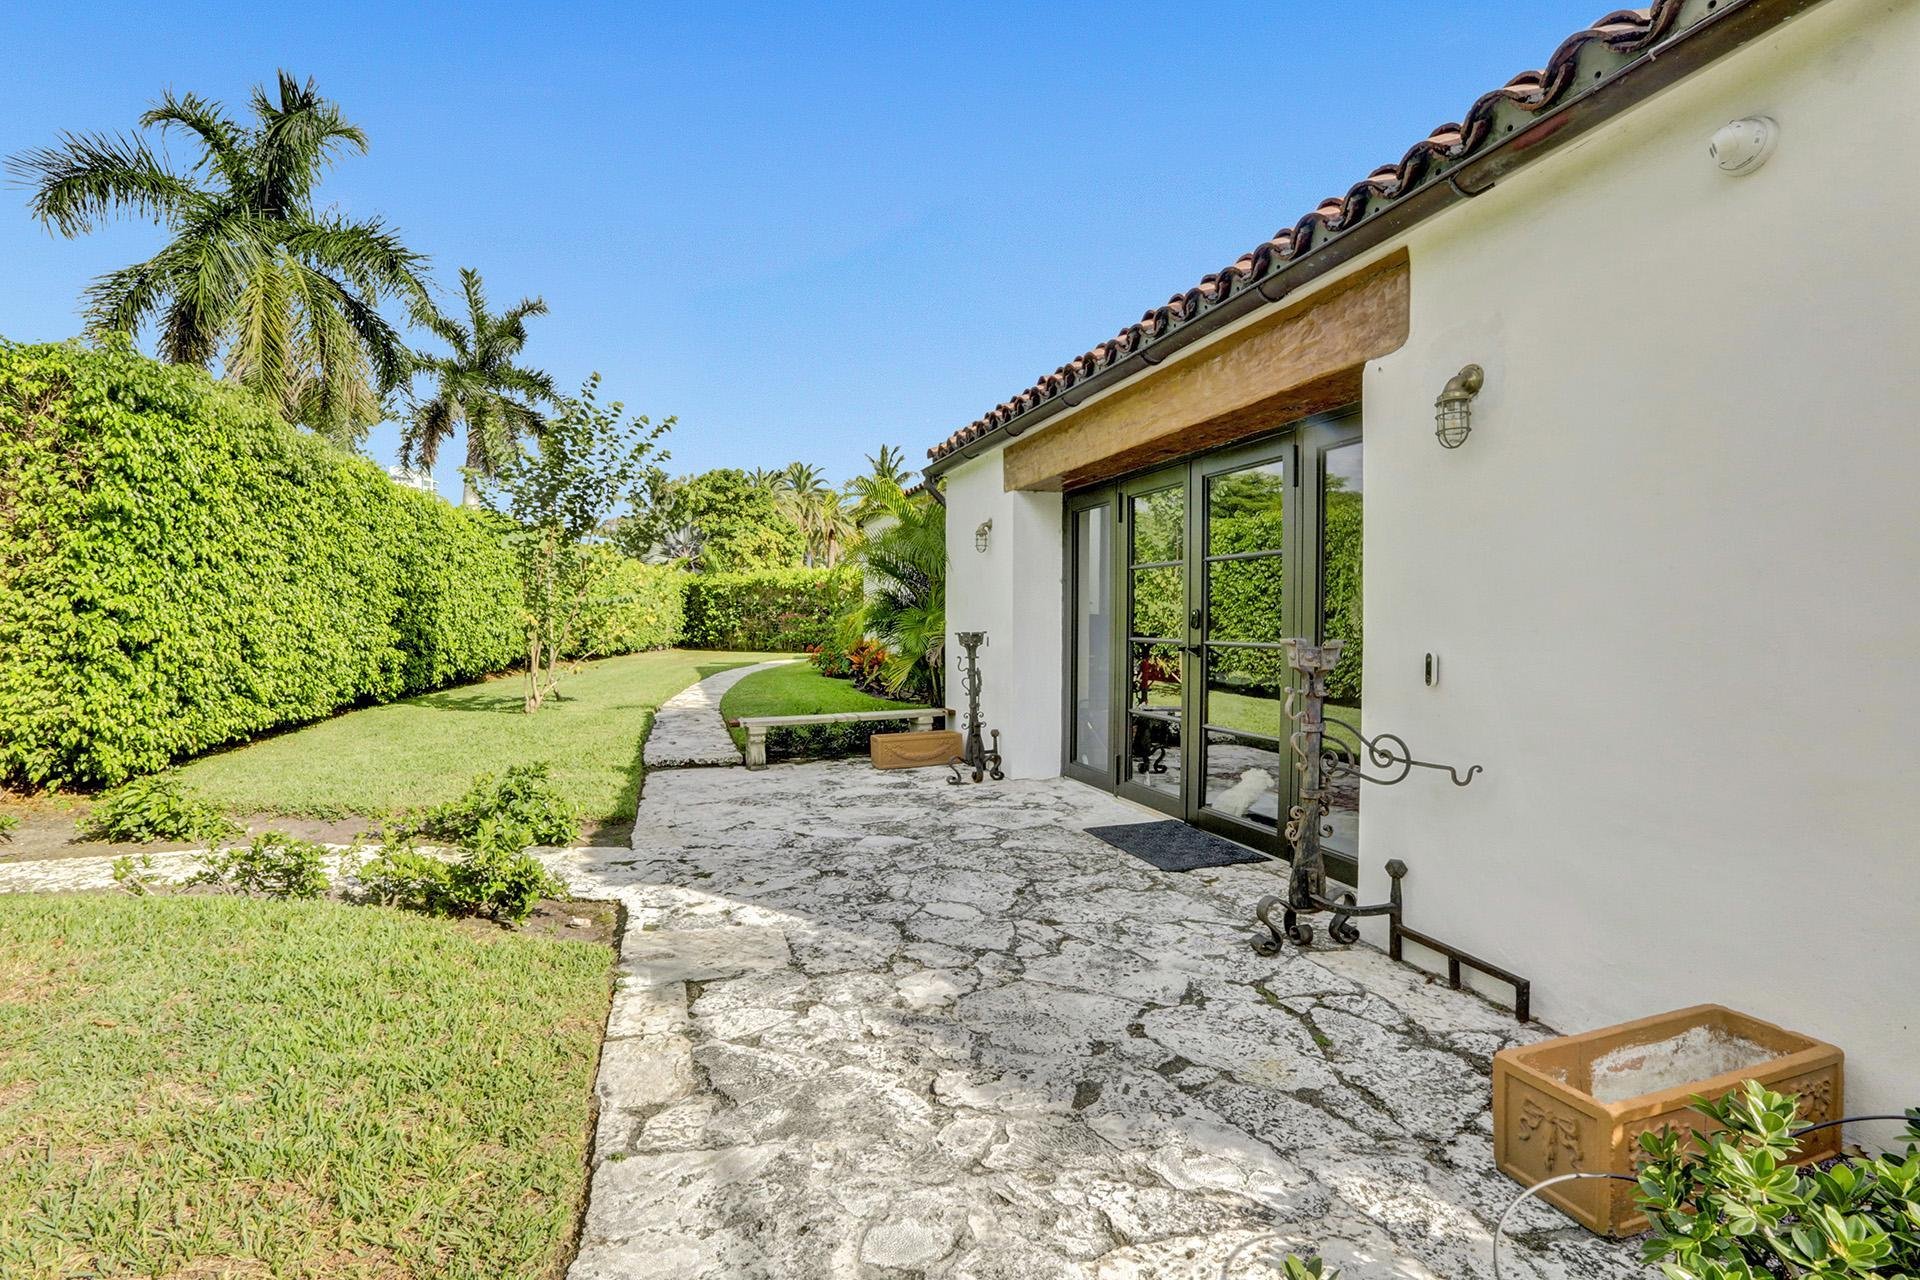 Check Out This Classic Miami Beach Mediterranean On Pine Tree Drive Asking $6.5 Million8.jpg